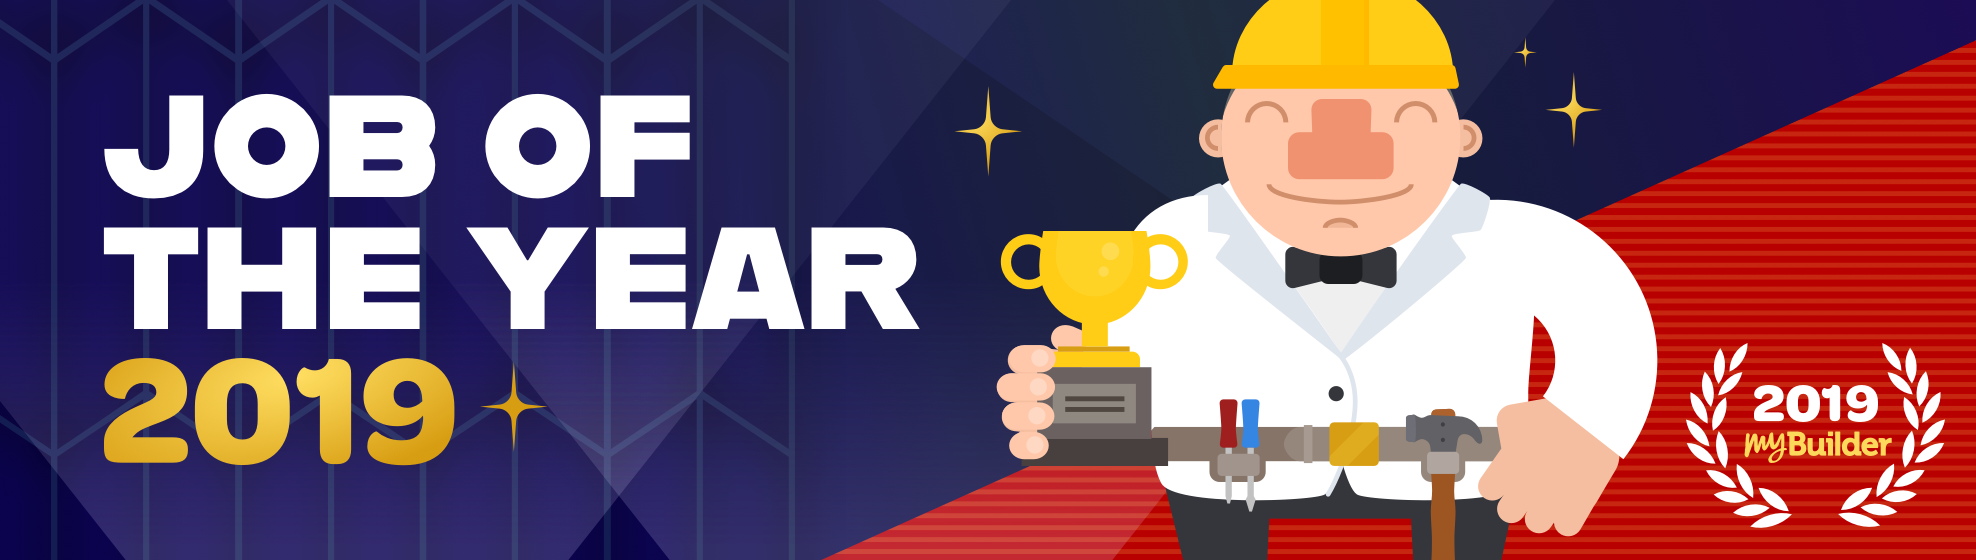 Job of the Year 2019 - COMPETITION CLOSED